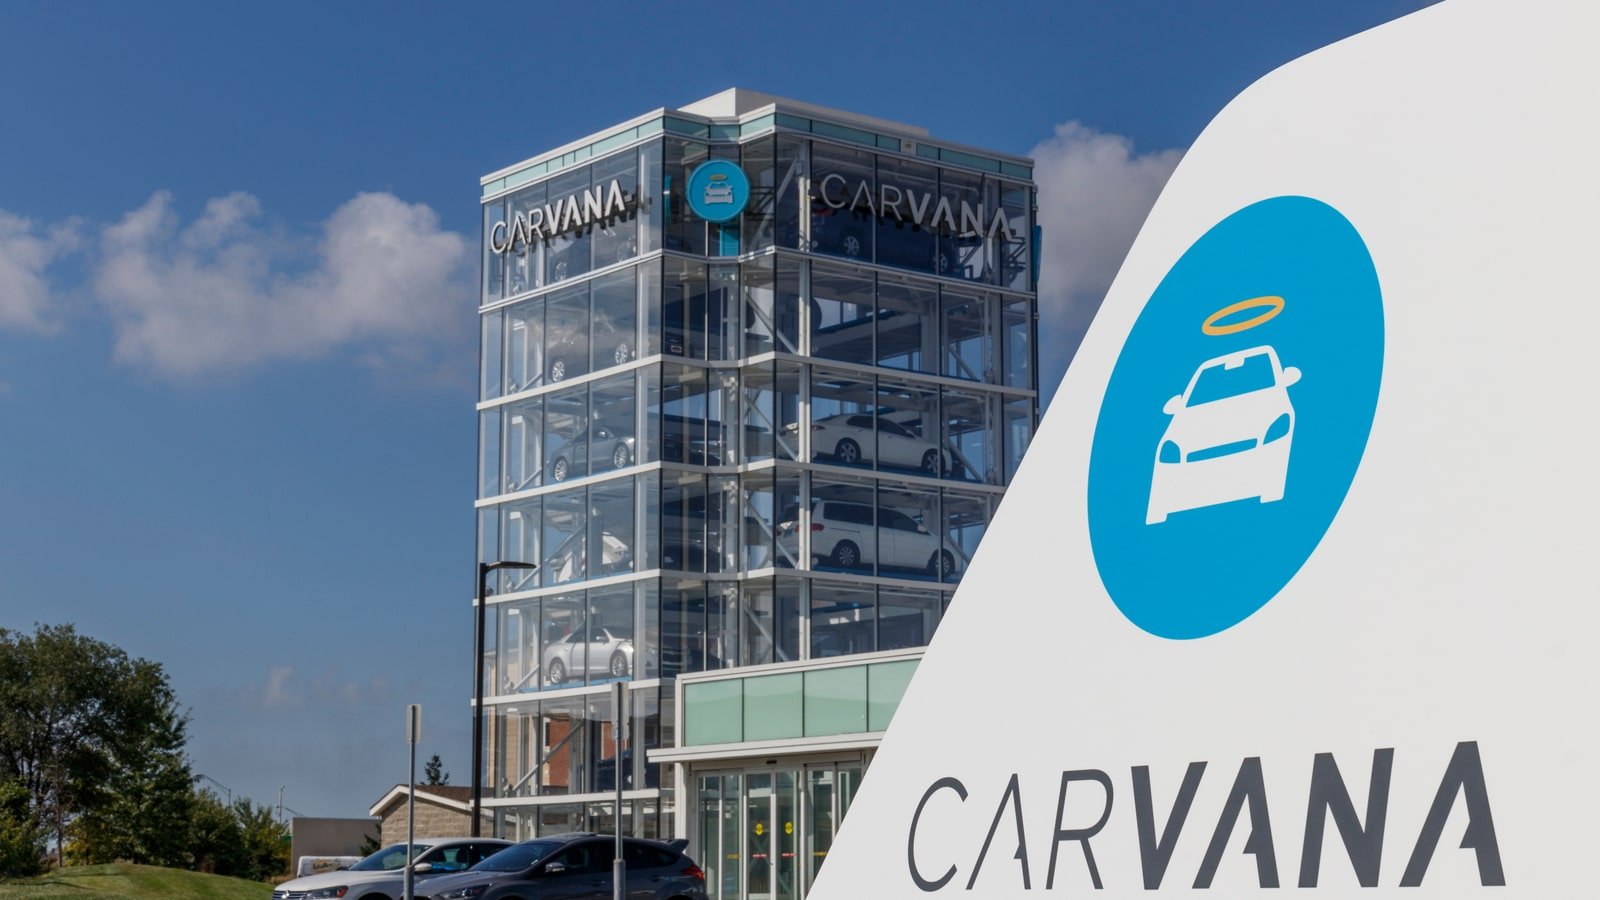 Carvana (CVNA) logo on white object in foreground as well as a high-rise building in the background